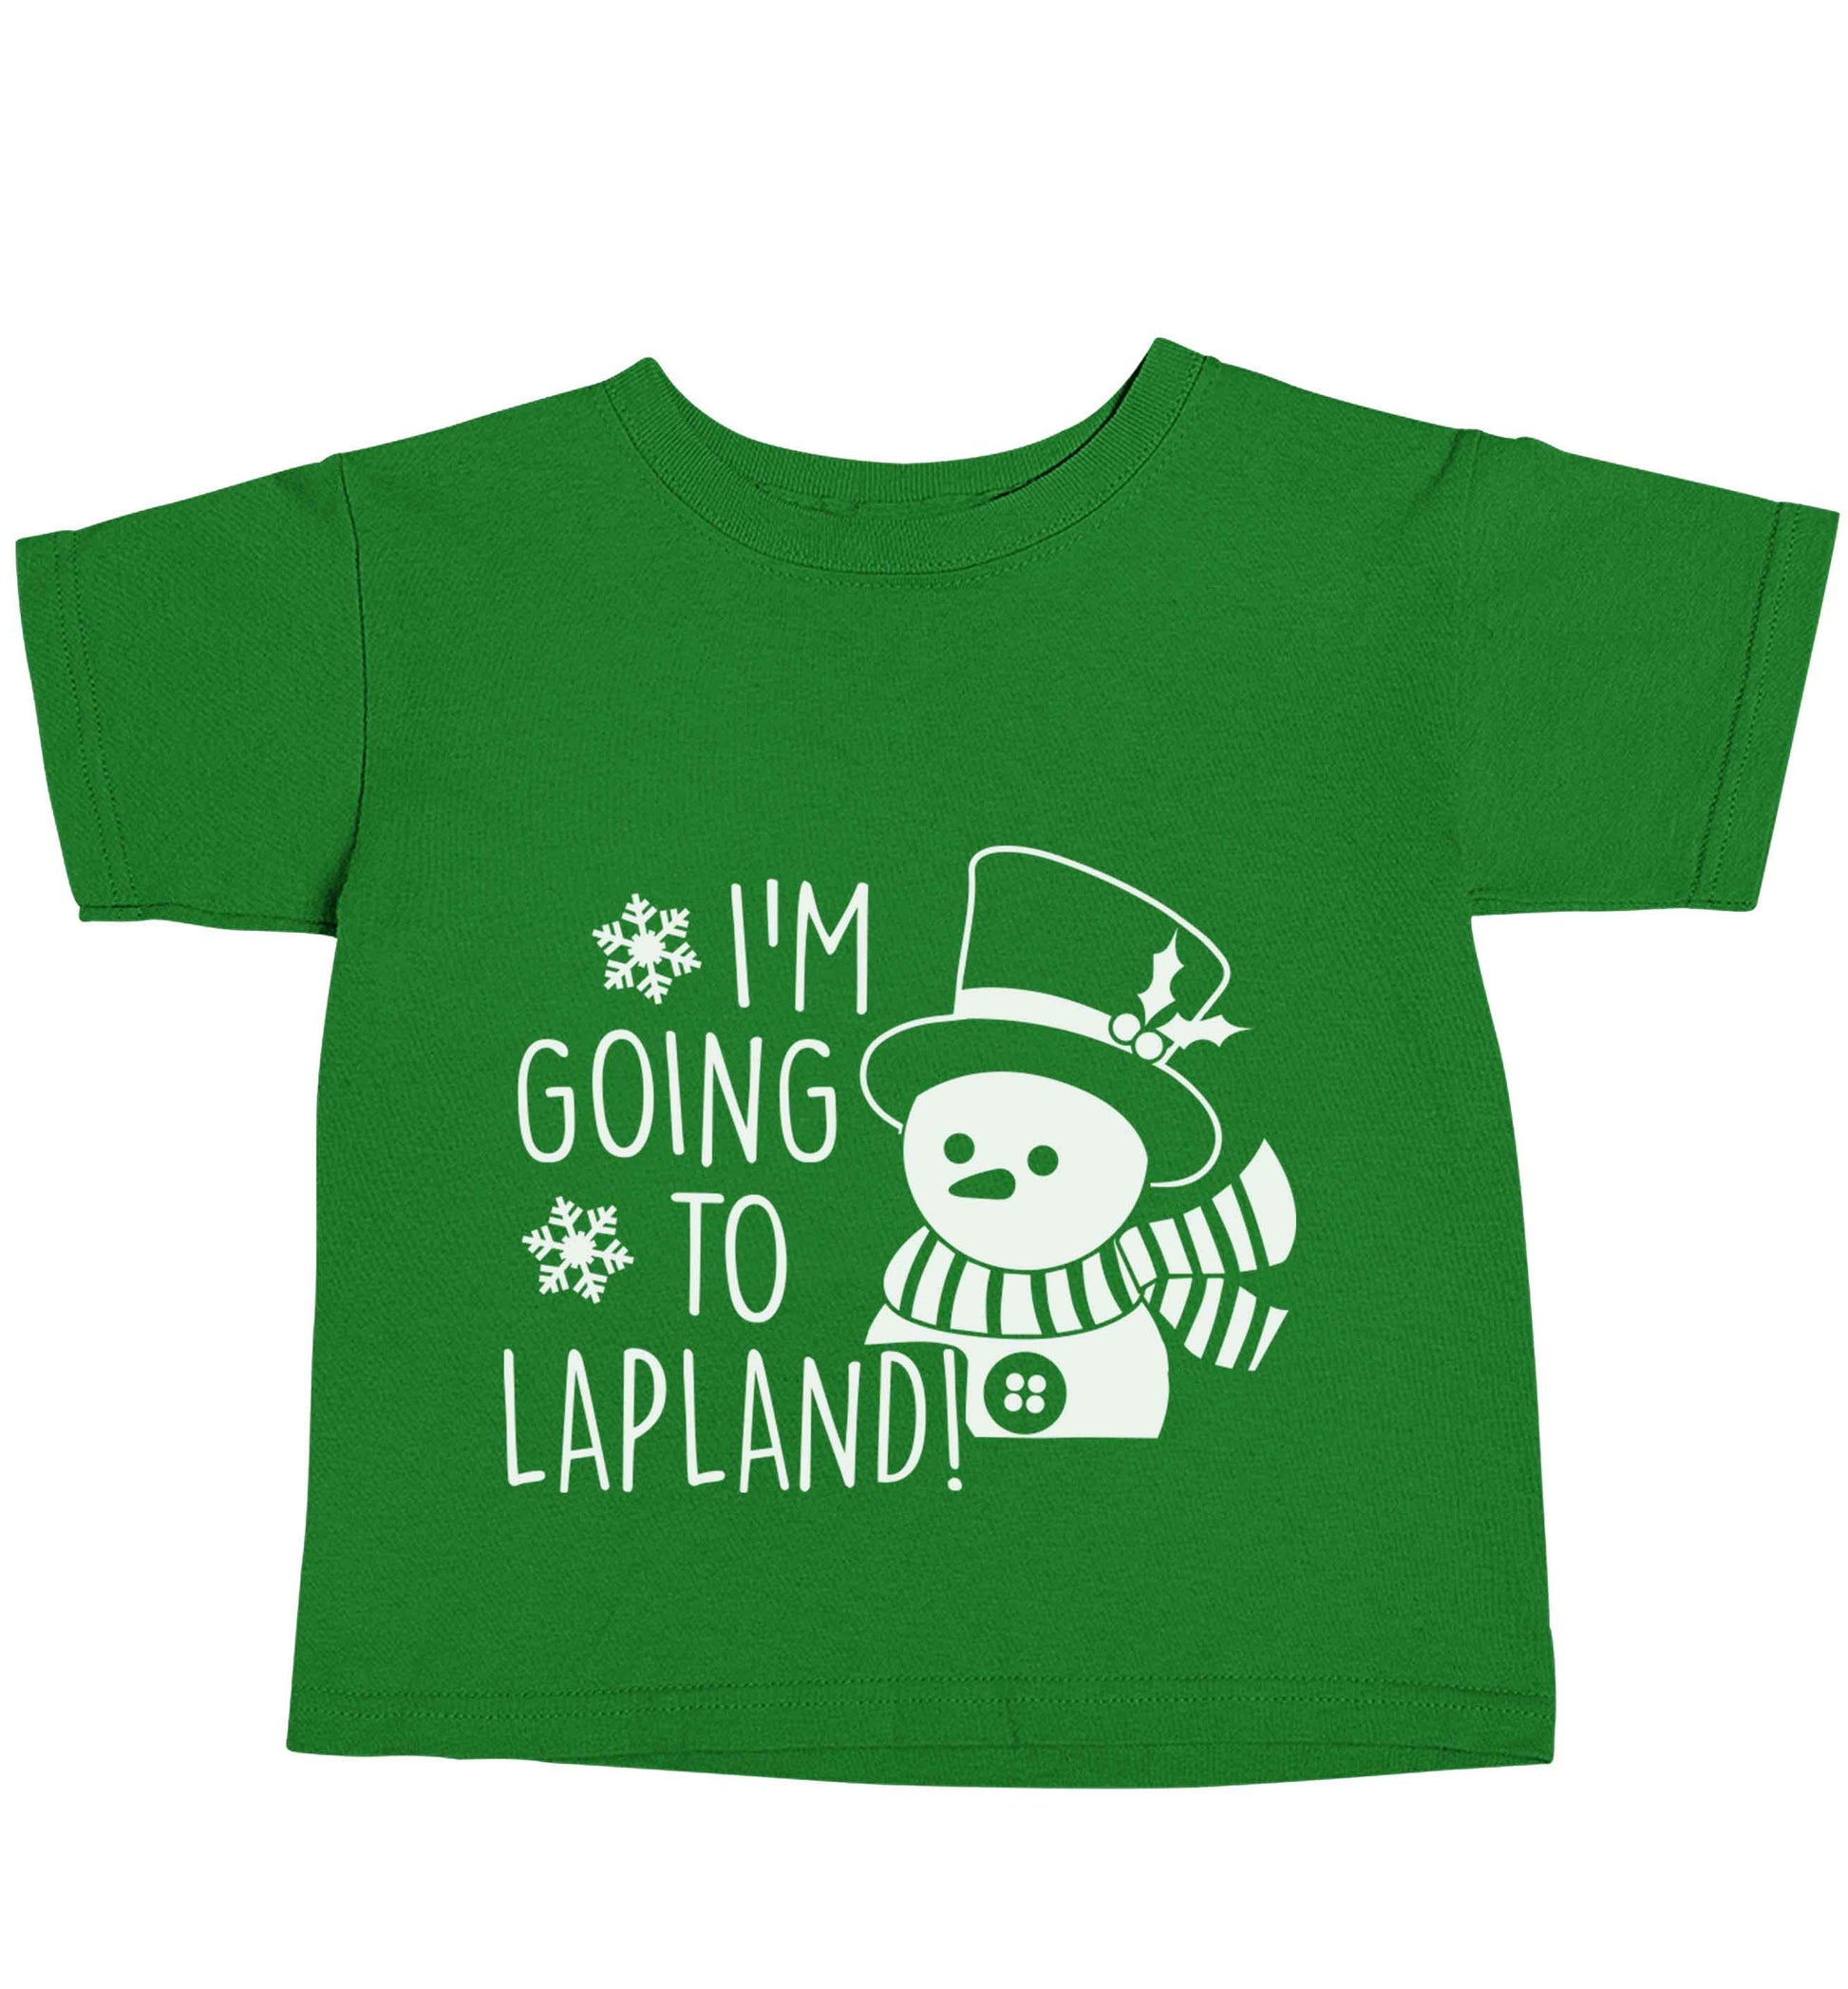 I'm going to Lapland green baby toddler Tshirt 2 Years